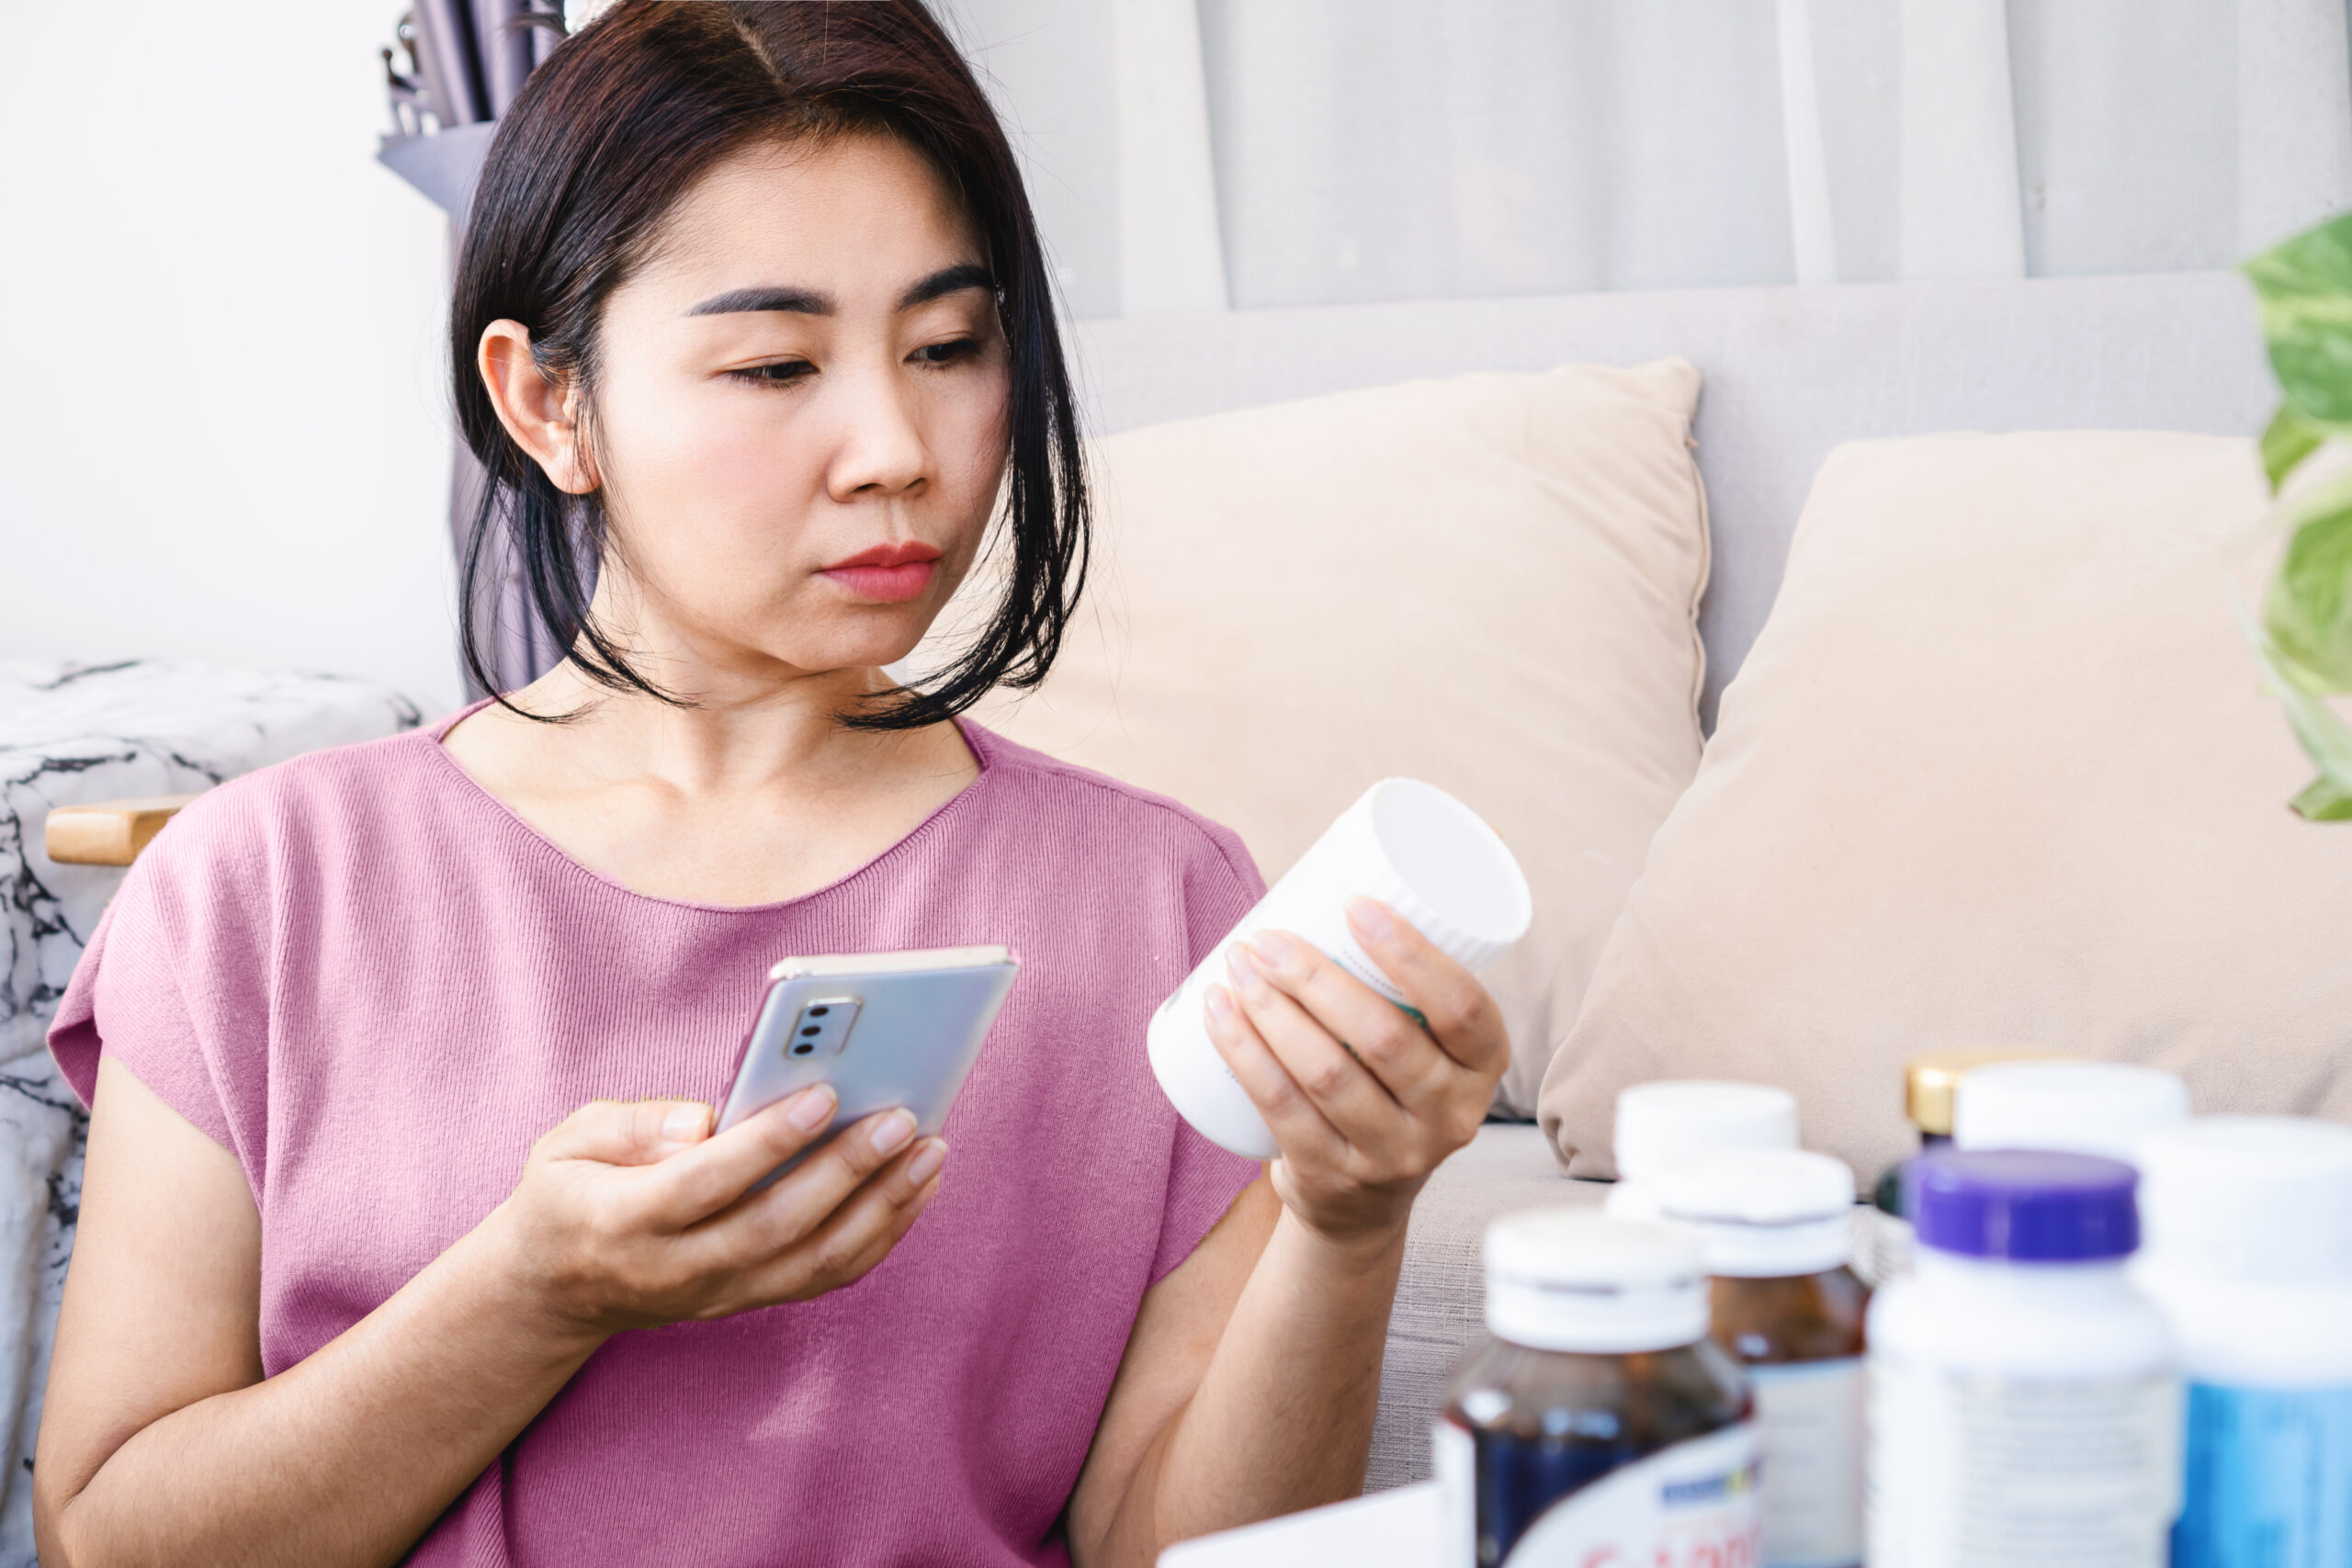 A woman intently reading information on her smartphone while holding a bottle of medication, researching effective treatments for genital herpes.